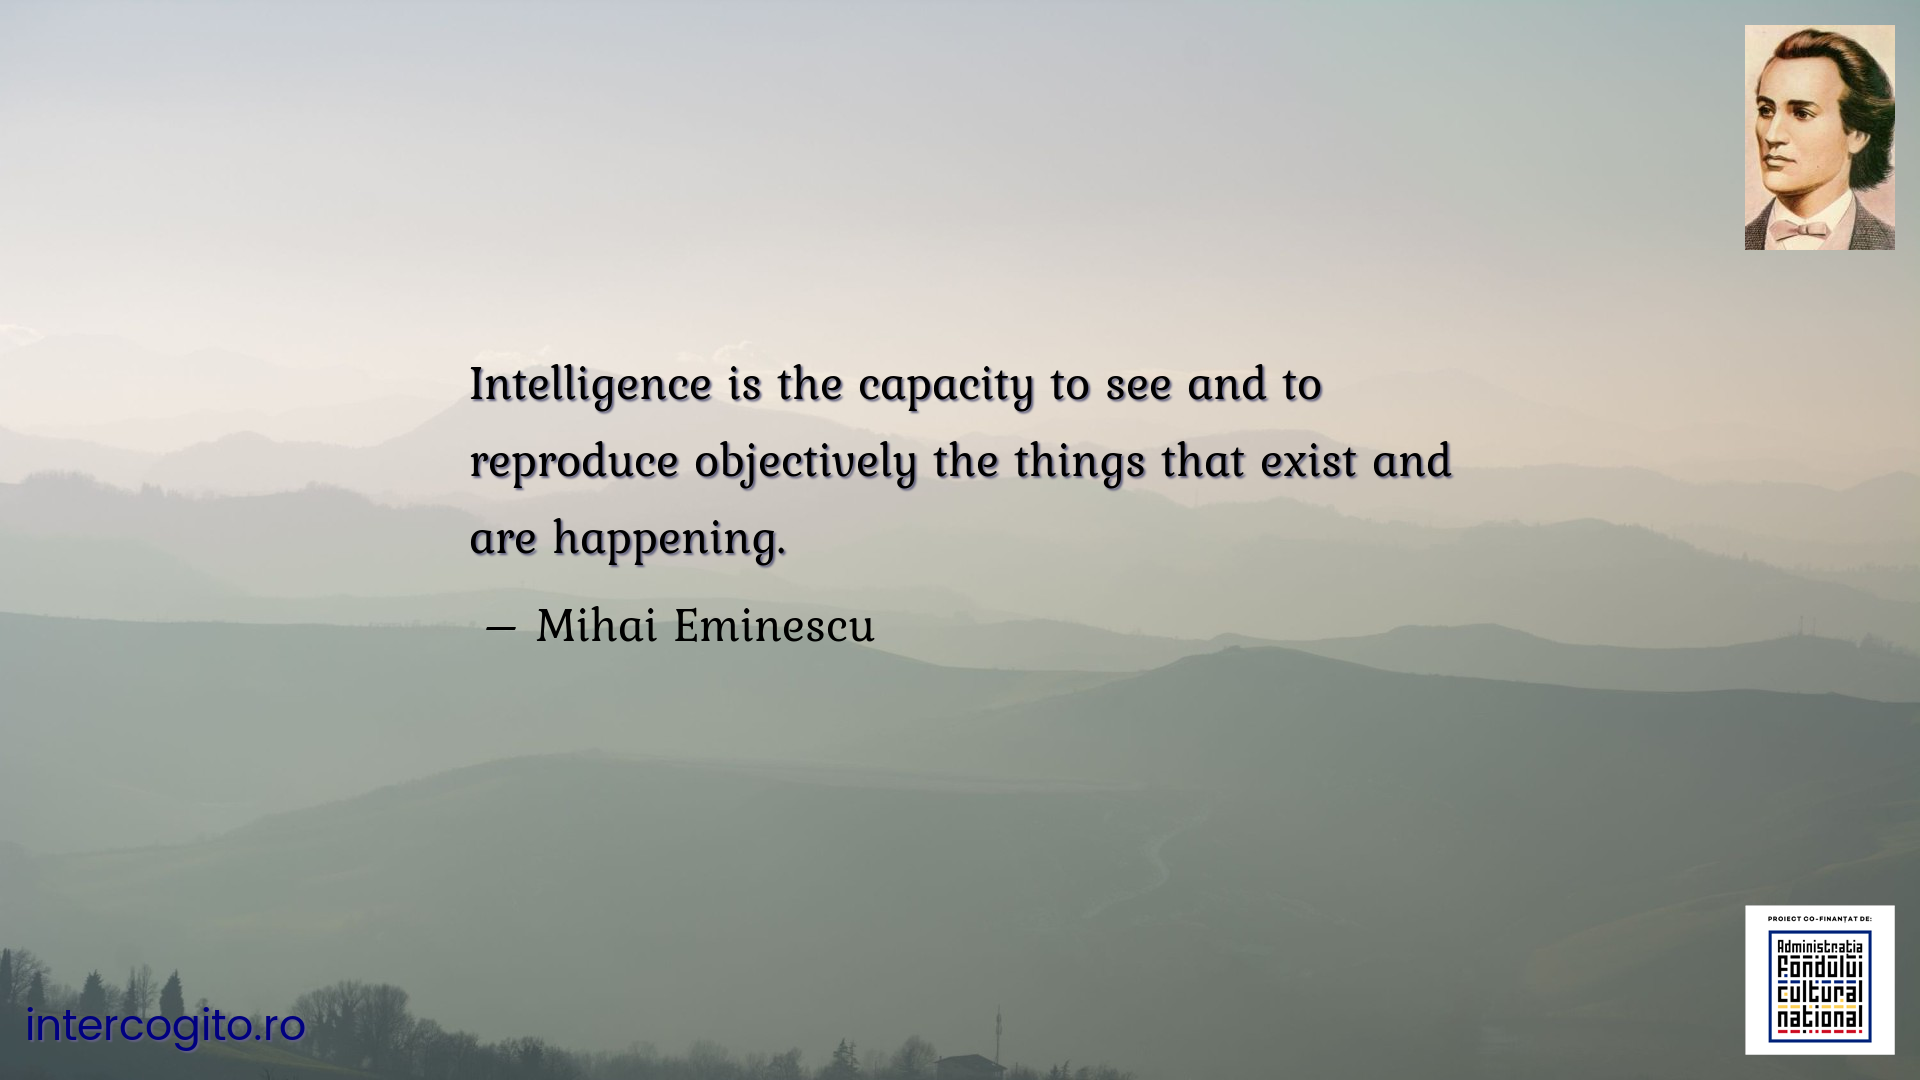 Intelligence is the capacity to see and to reproduce objectively the things that exist and are happening.